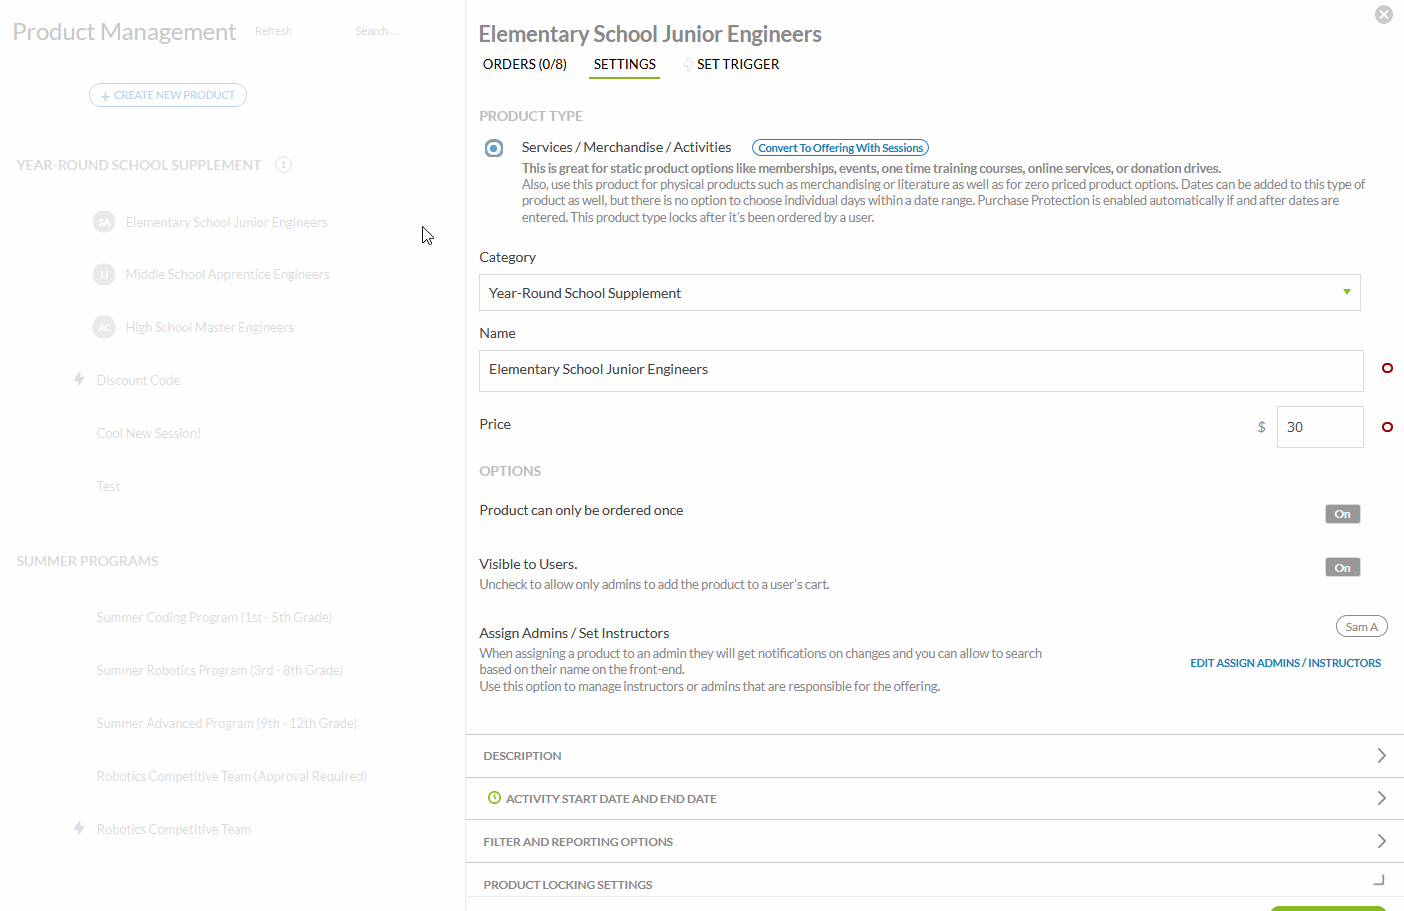 filter and reporting options